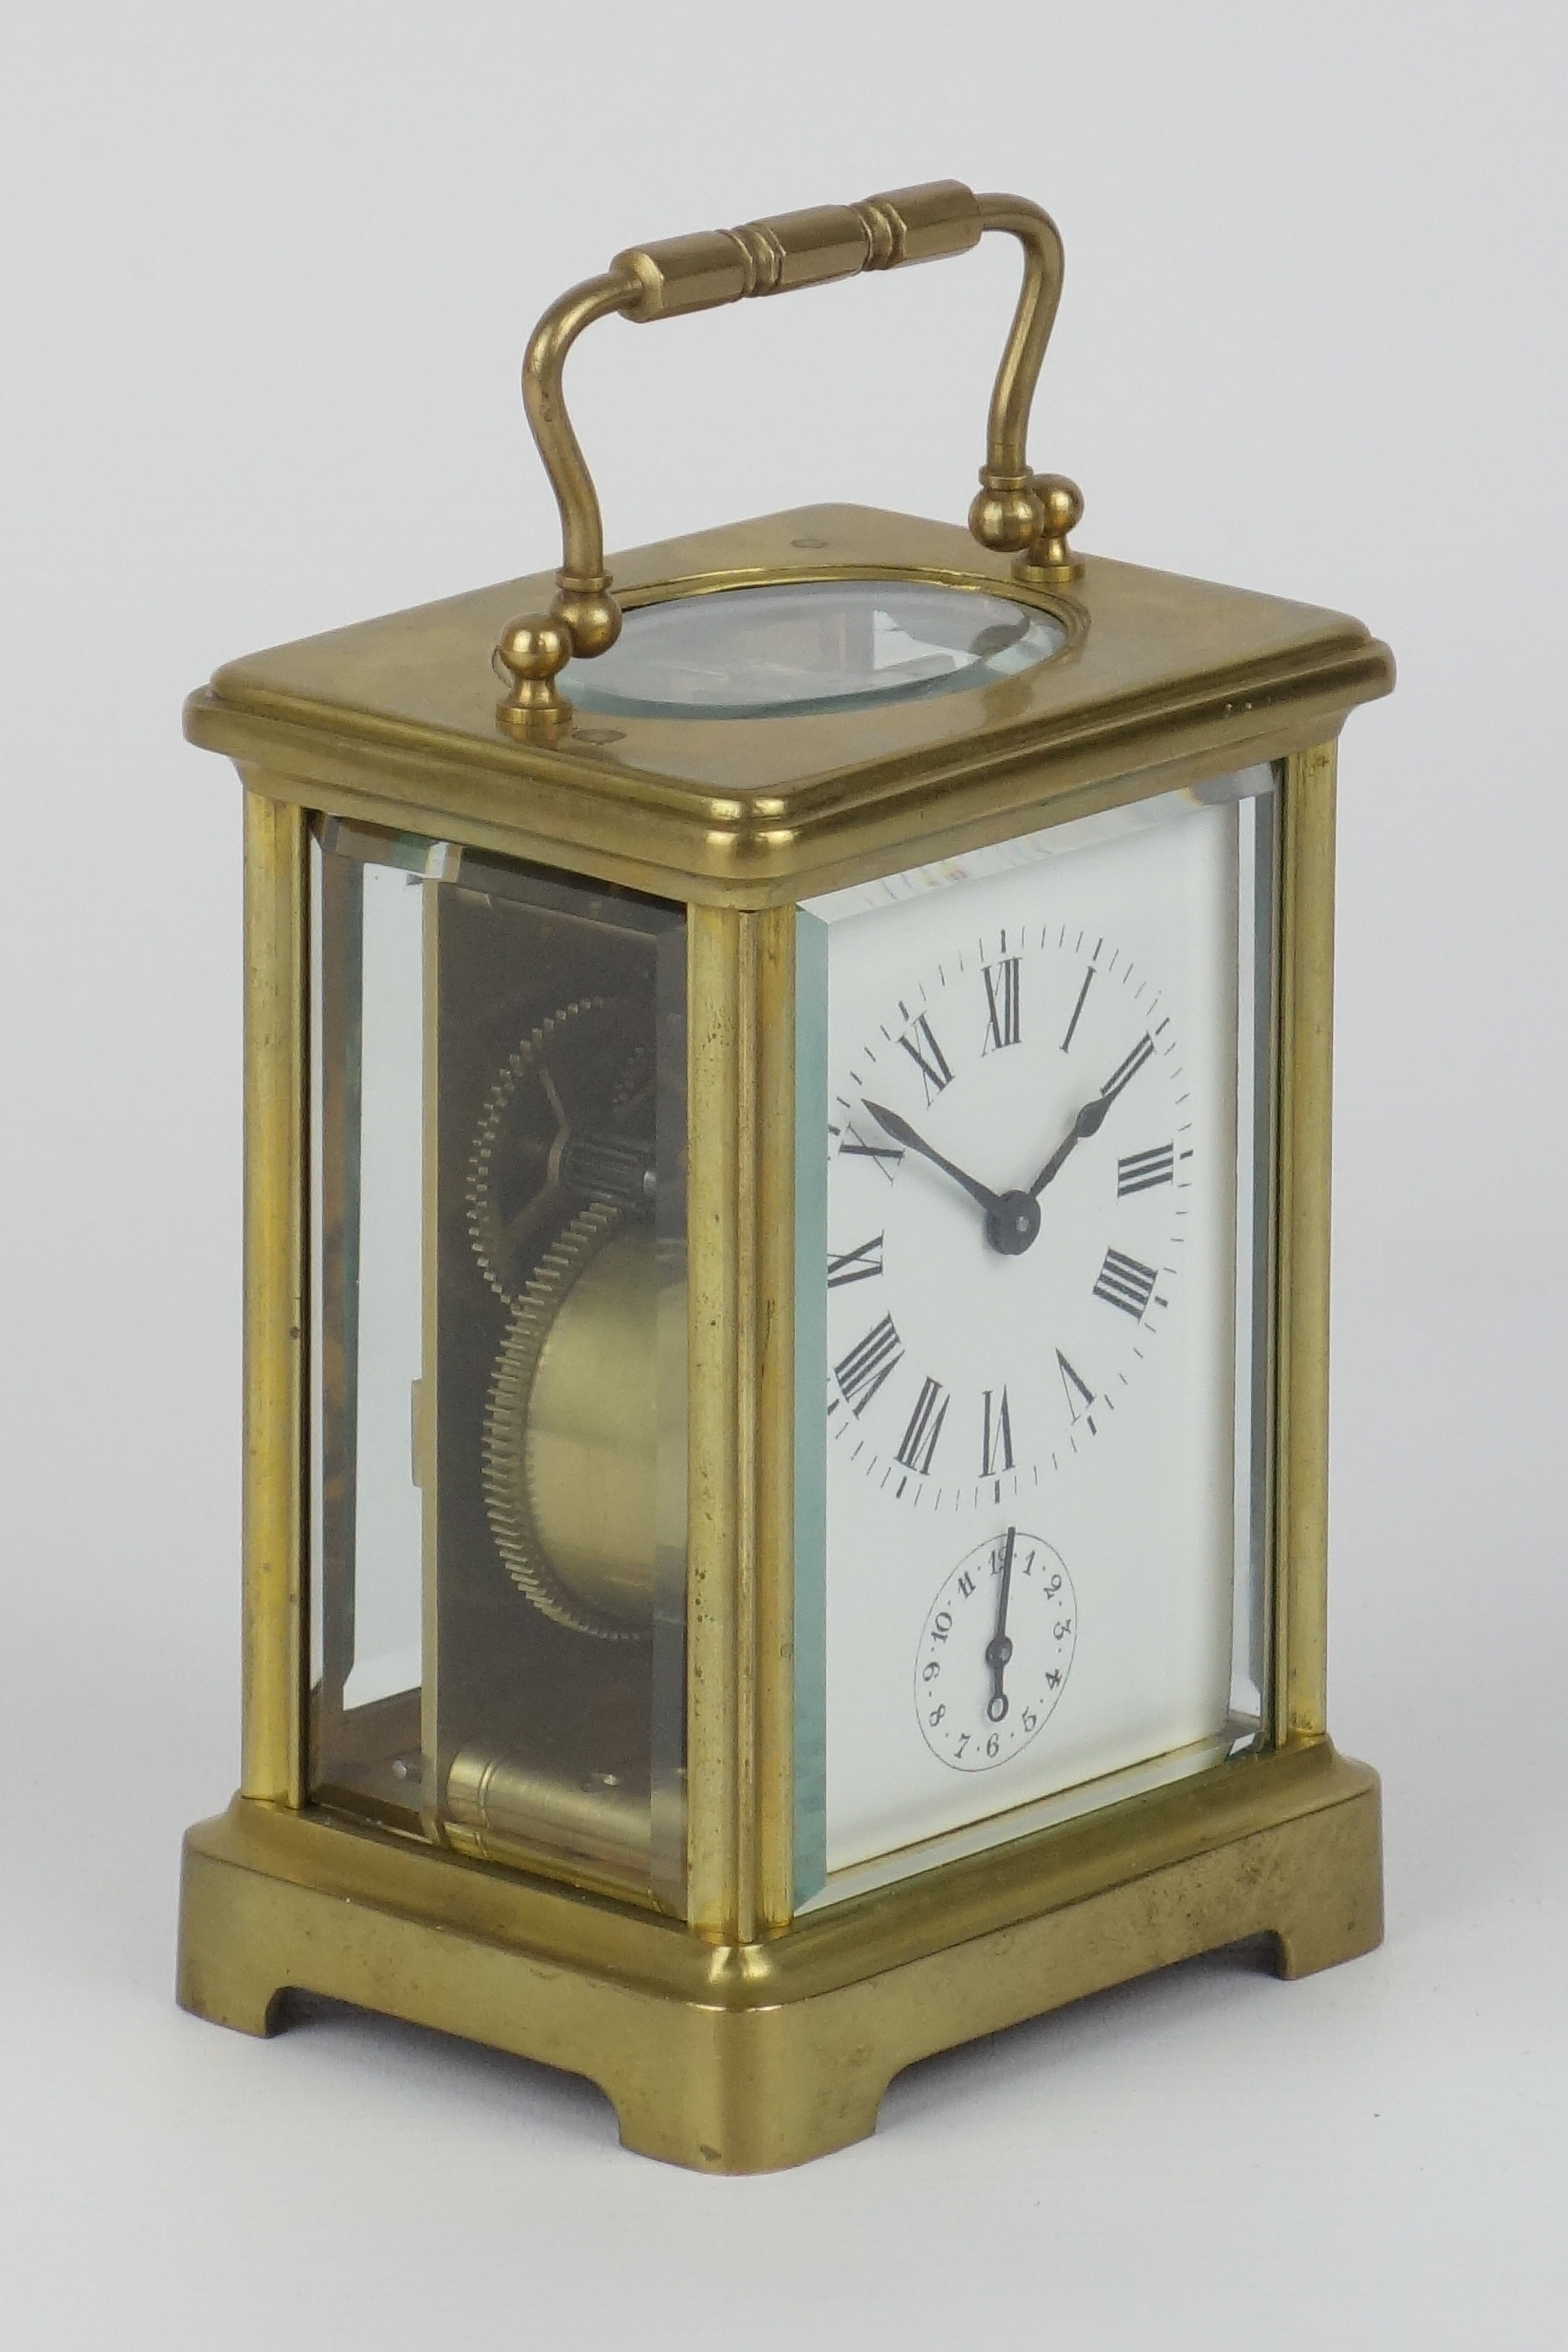 20th century French brass carriage clock, with subsidiary alarm dial striking on bell, stamped 417,